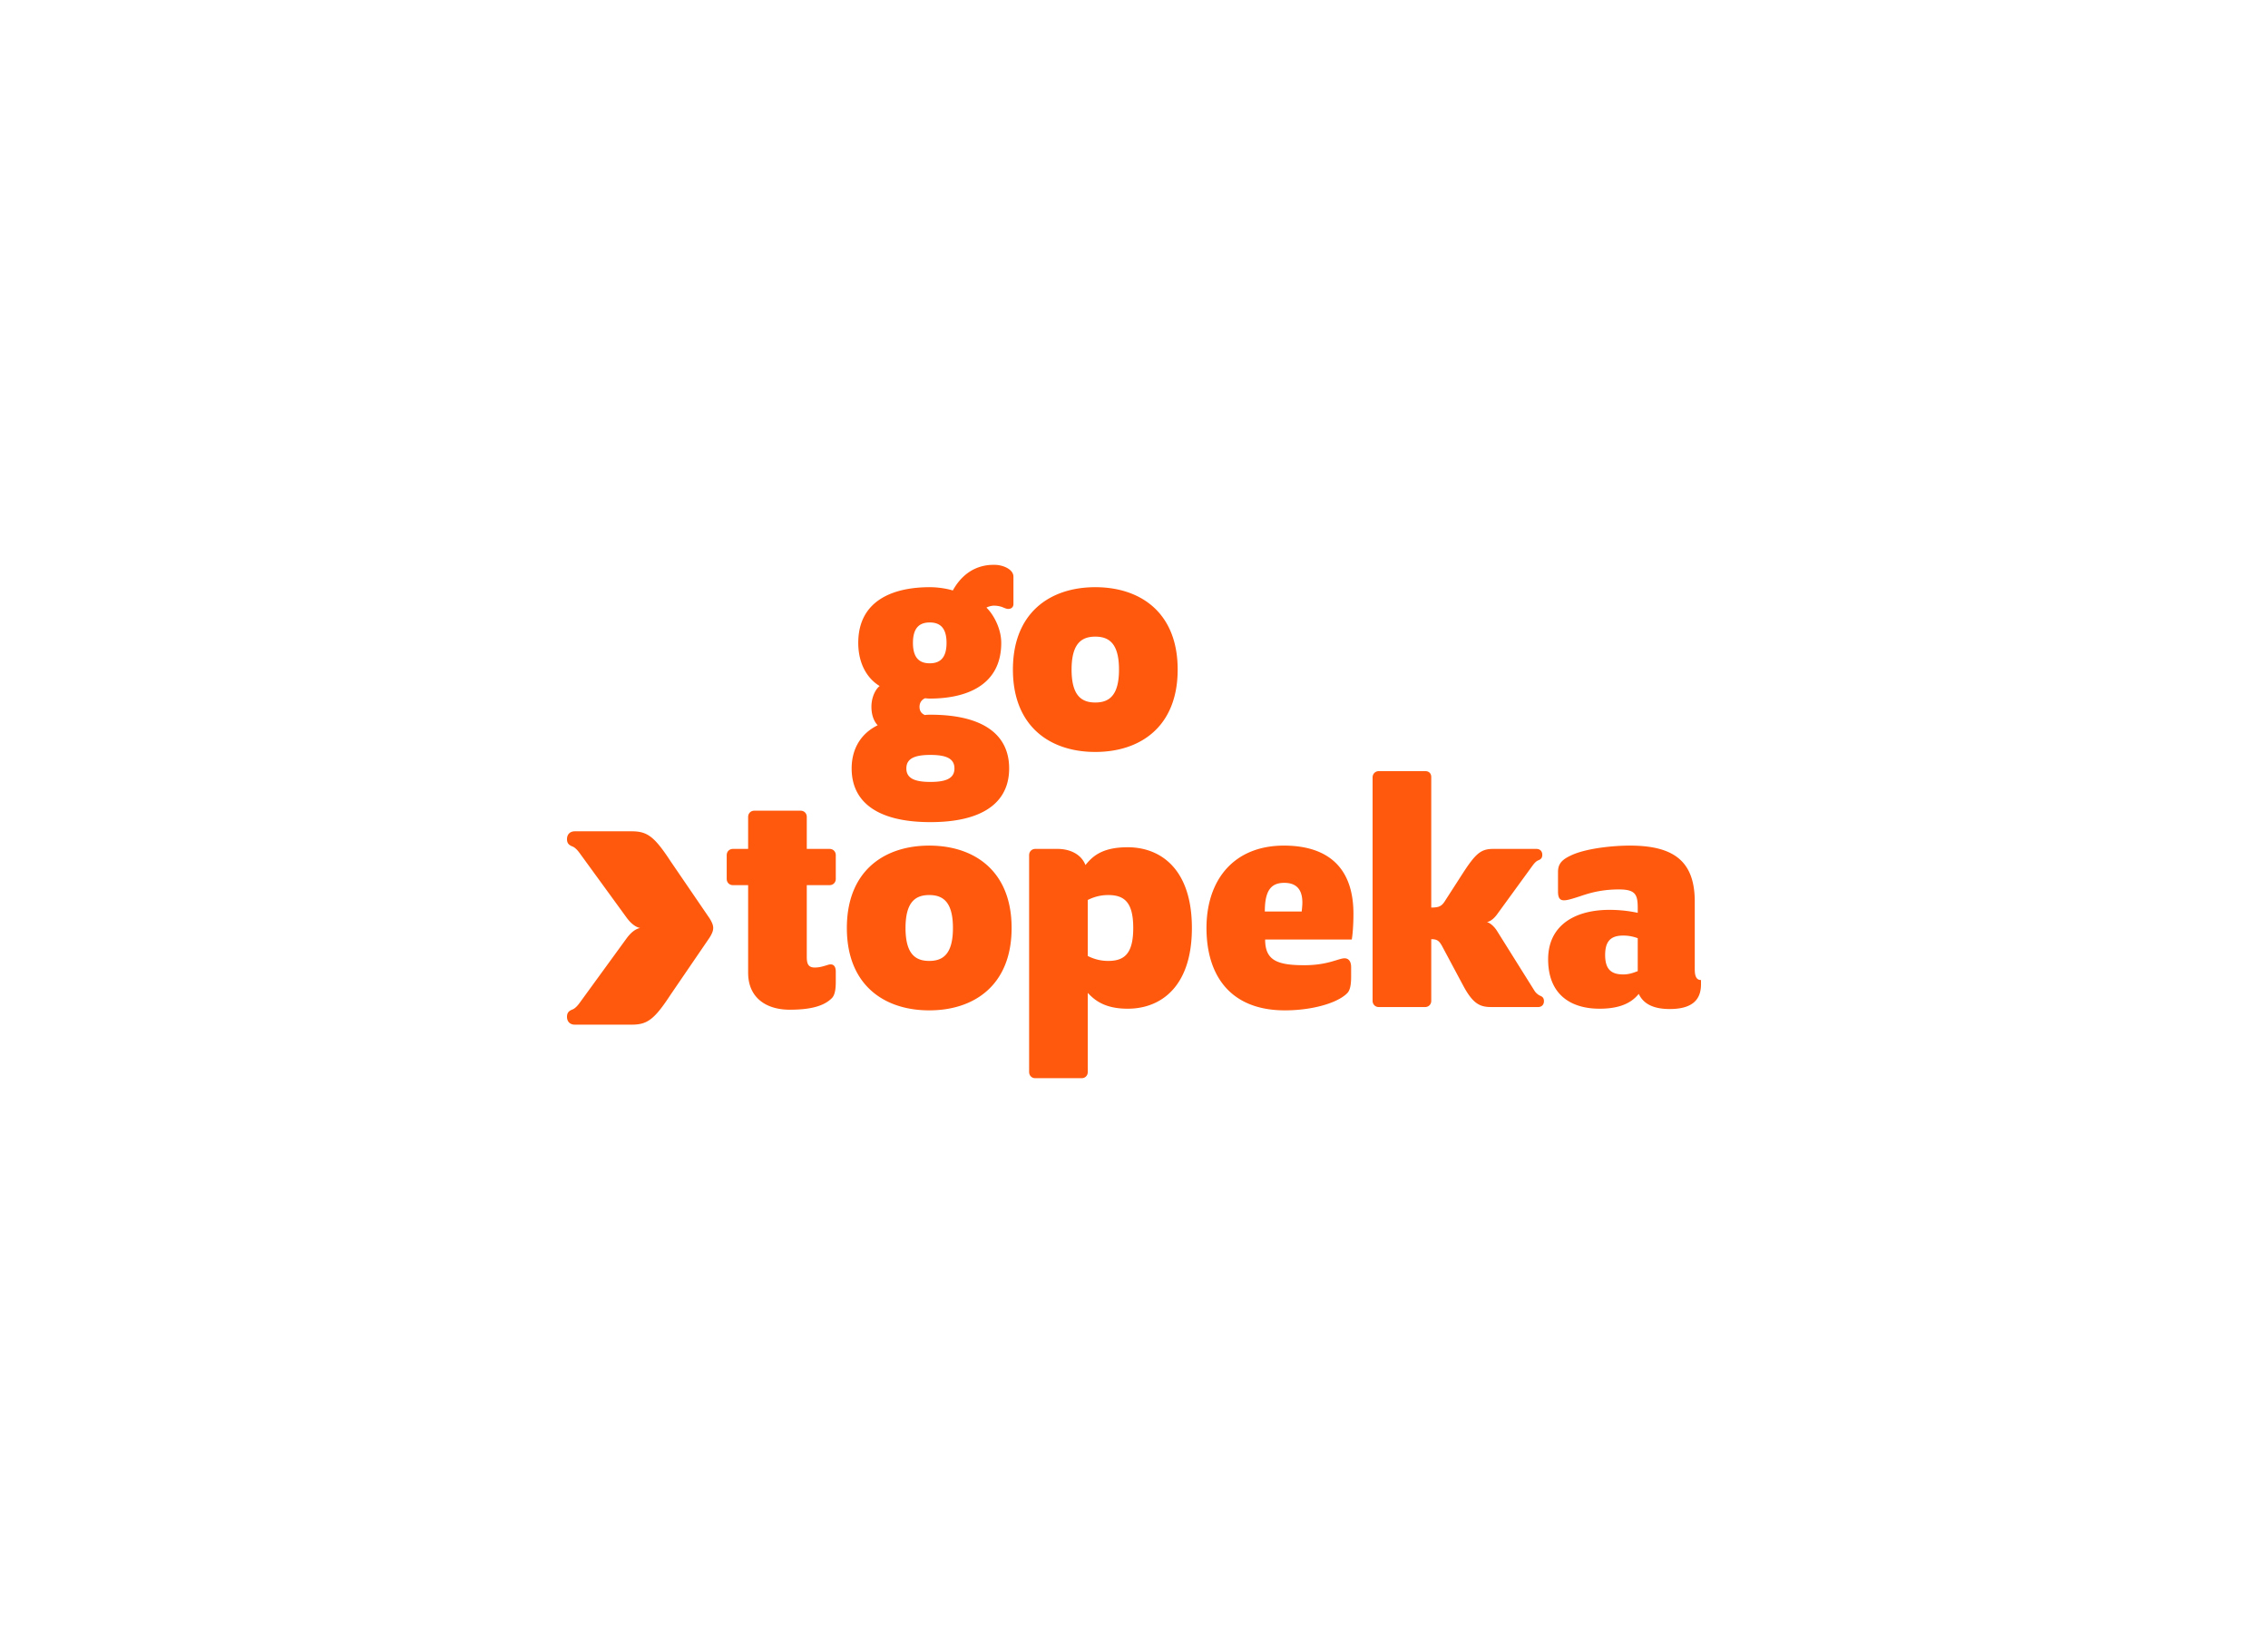 GO Topeka creates county-wide economic success for all companies and citizens through implementation of an aggressive economic-development strategy that capitalizes on the strengths of the community.